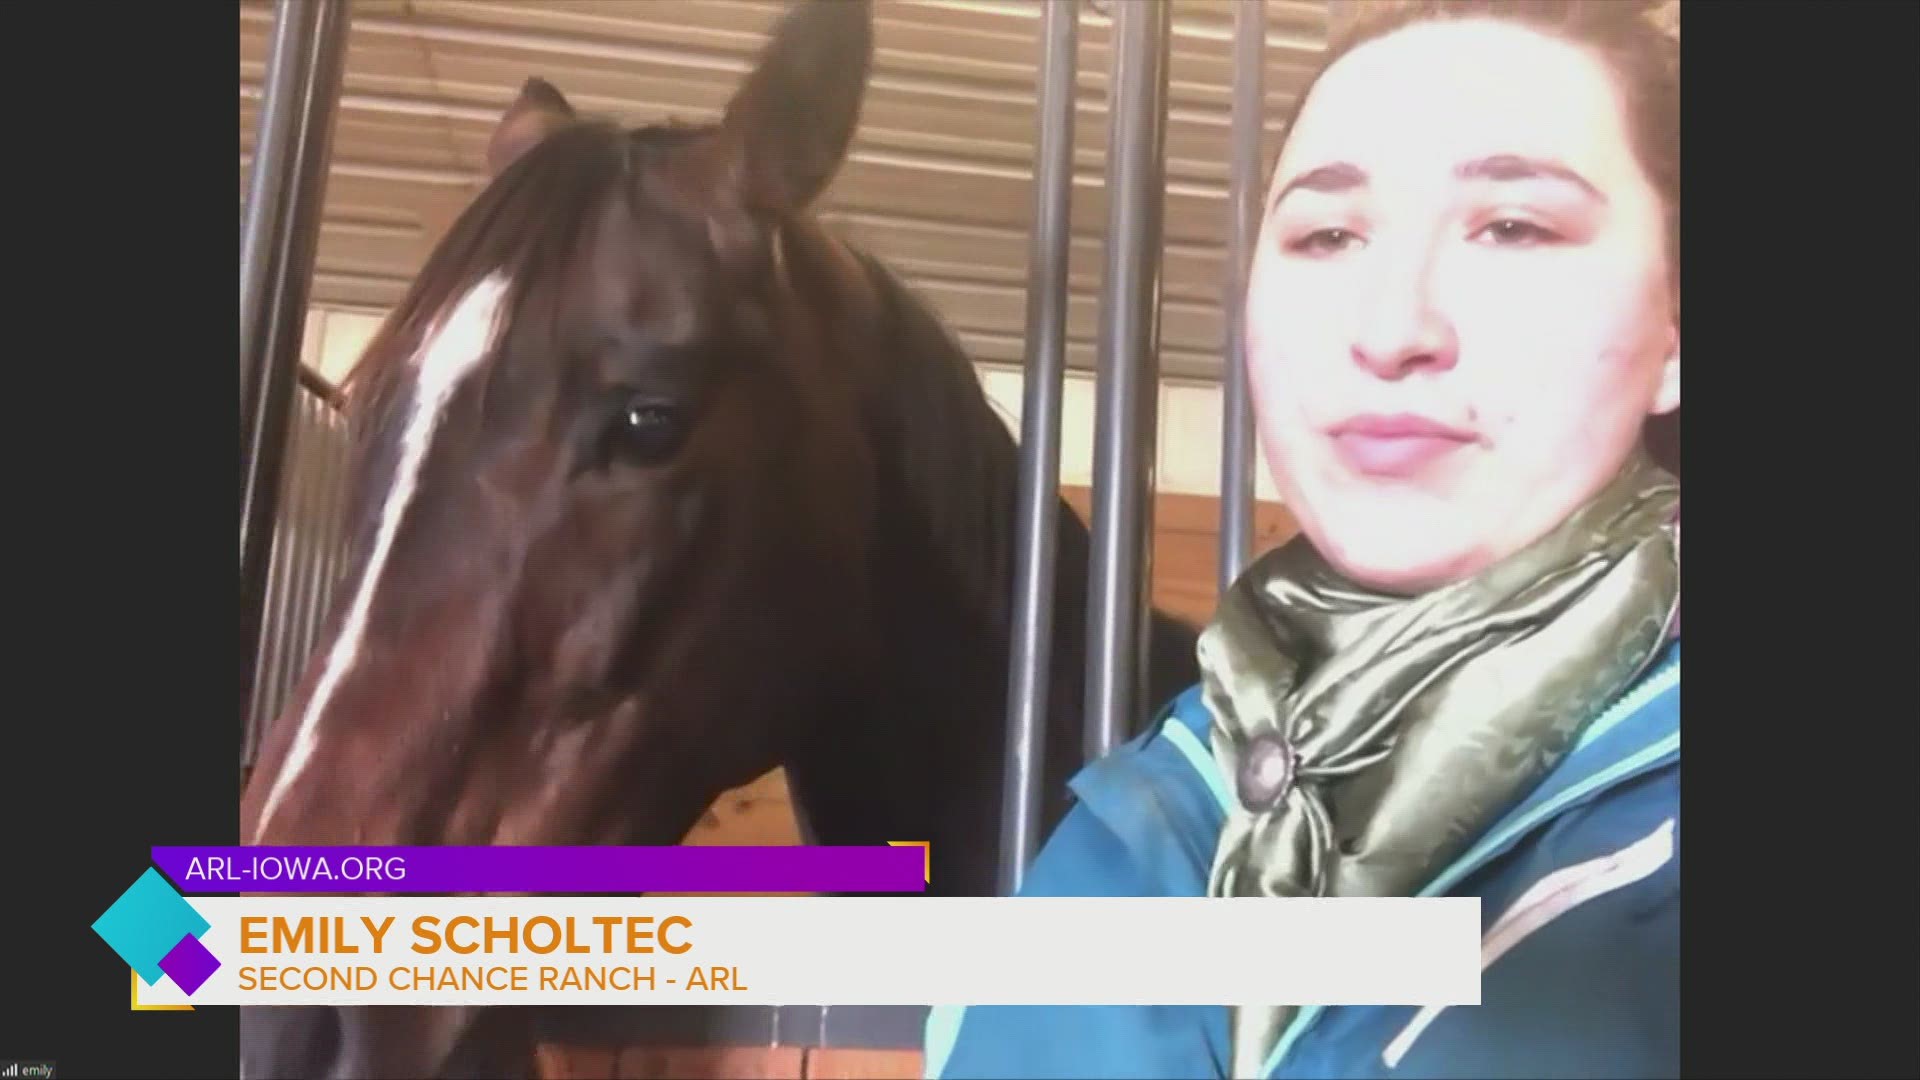 Emily Scholtec of the ARL introduces you to Jill, a Thoroughbred horse who is looking for a new home! Also, learn how to FOSTER animals like horses, roosters & pigs